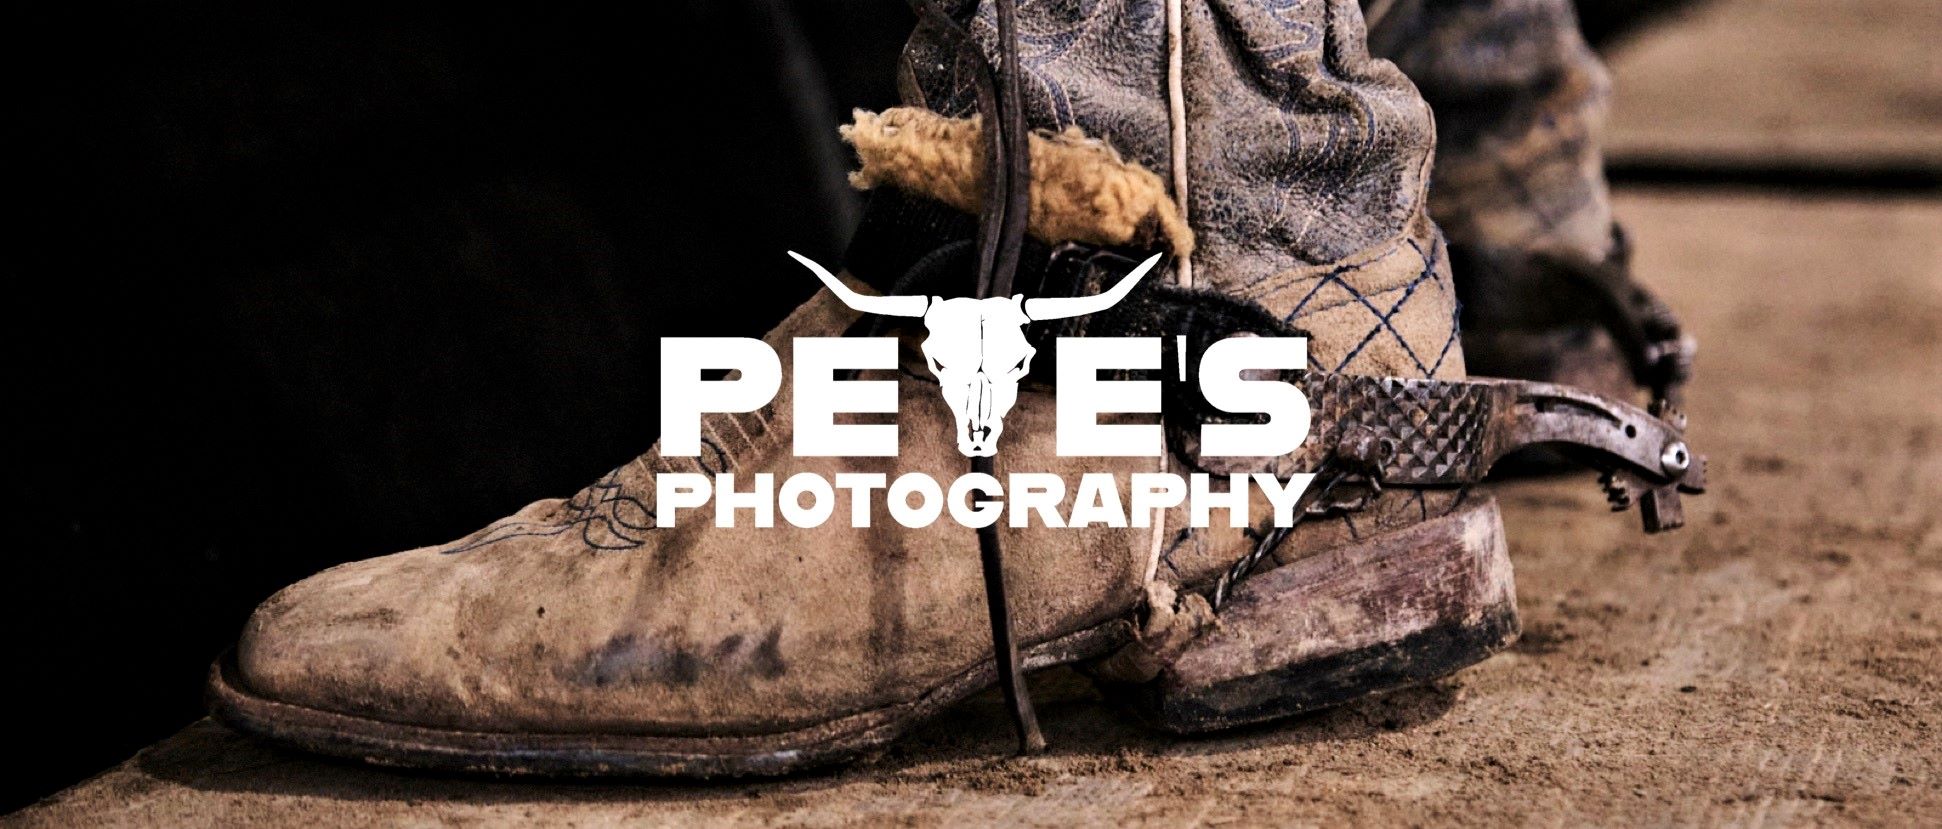 Pete's Photography - Ontario Western Events